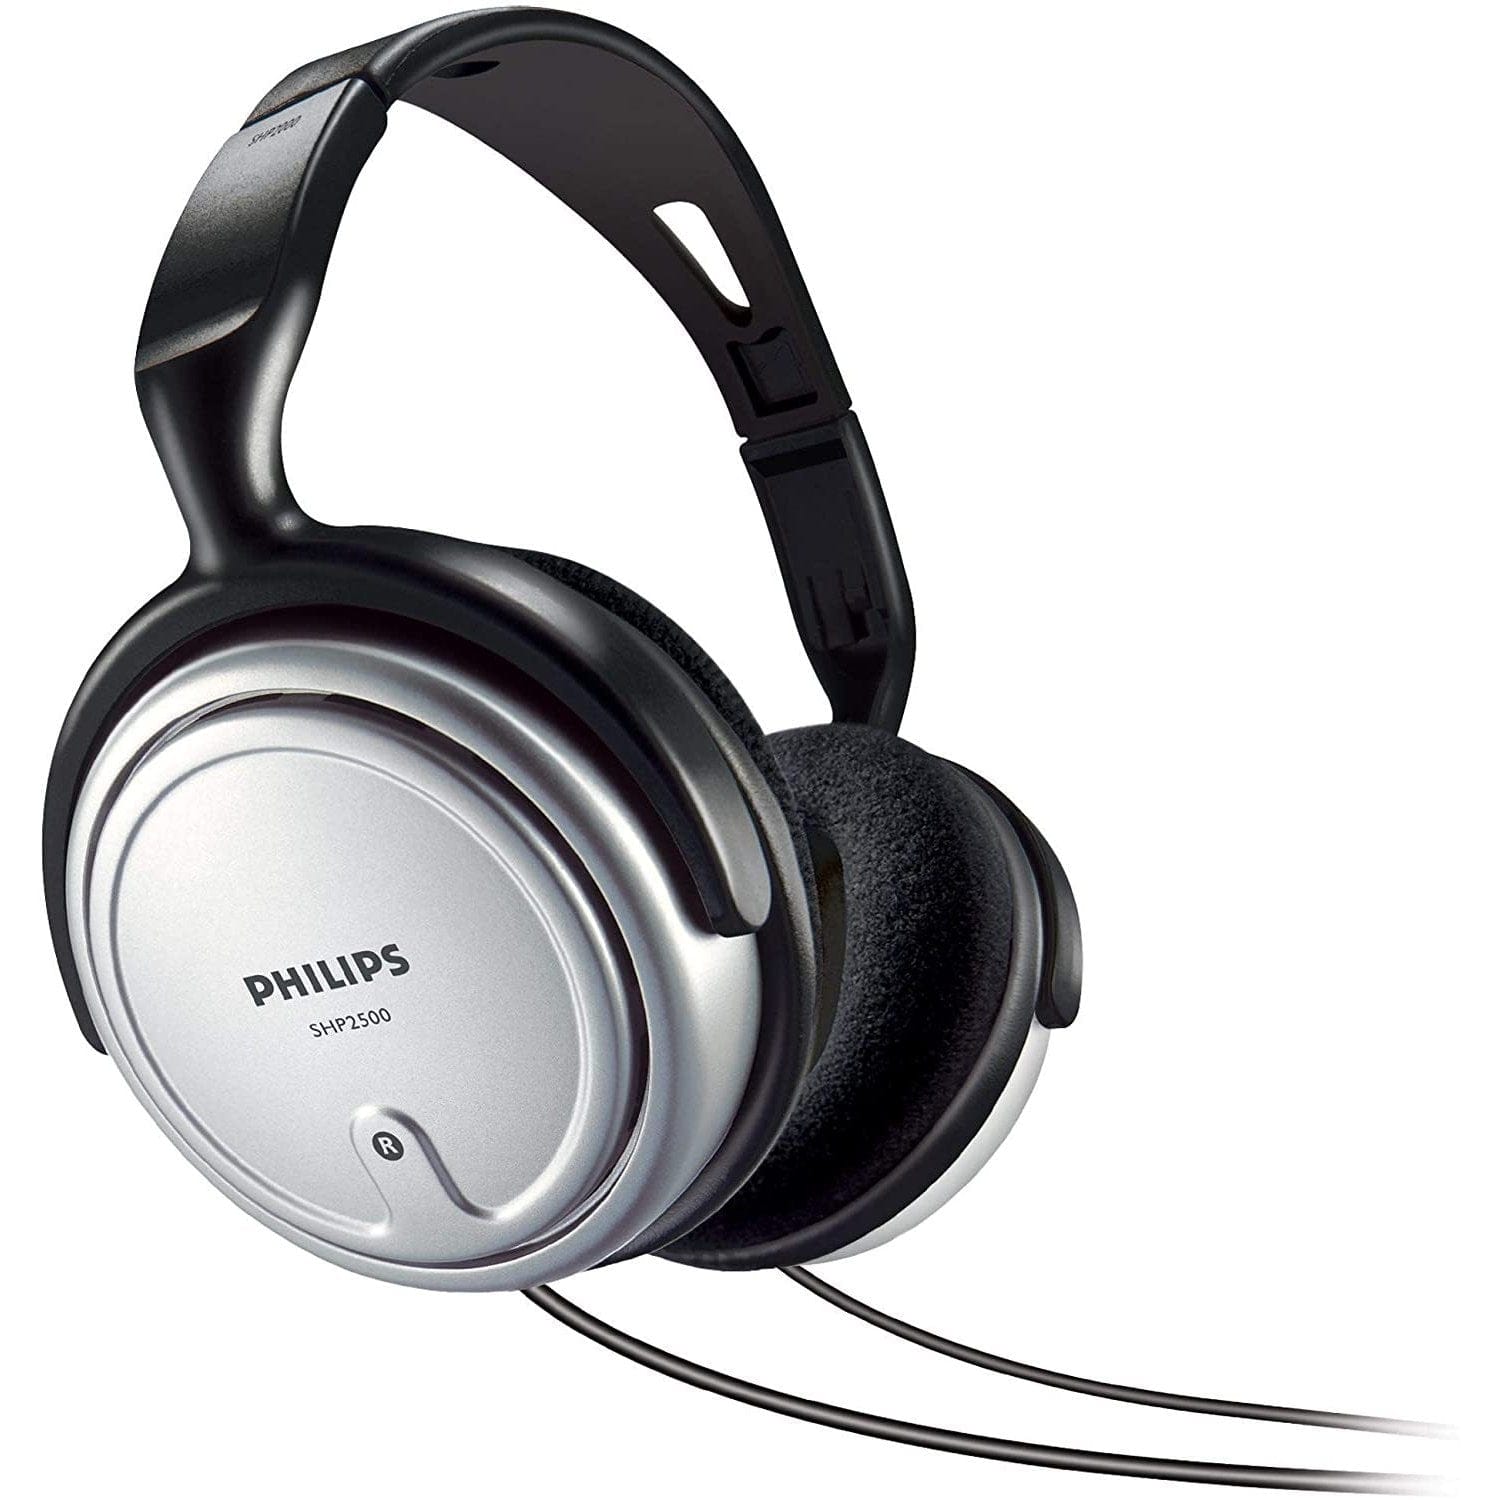 PHILIPS SHP2500/10 OVER-EAR INDOOR CORDED HEADPHONE FOR MUSIC/PC/TV - GREY [ACCESSORIES]